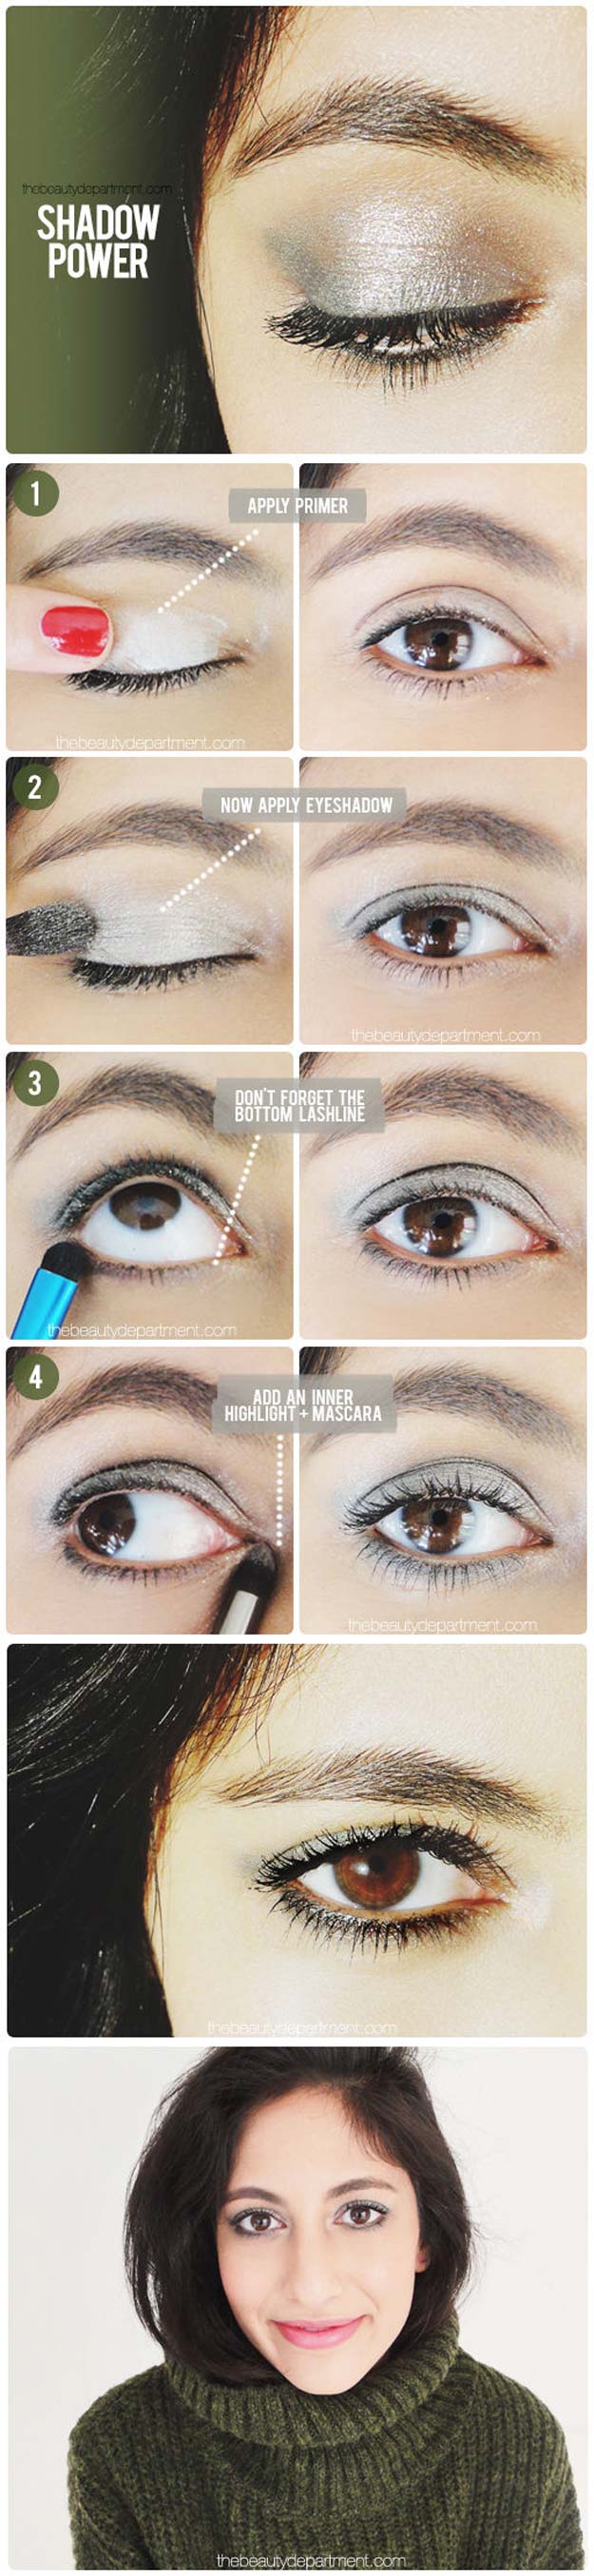 Best Eyeshadow Tutorials - Make It Brighter! - Easy Step by Step How To For Eye Shadow - Cool Makeup Tricks and Eye Makeup Tutorial With Instructions - Quick Ways to Do Smoky Eye, Natural Makeup, Looks for Day and Evening, Brown and Blue Eyes - Cool Ideas for Beginners and Teens 